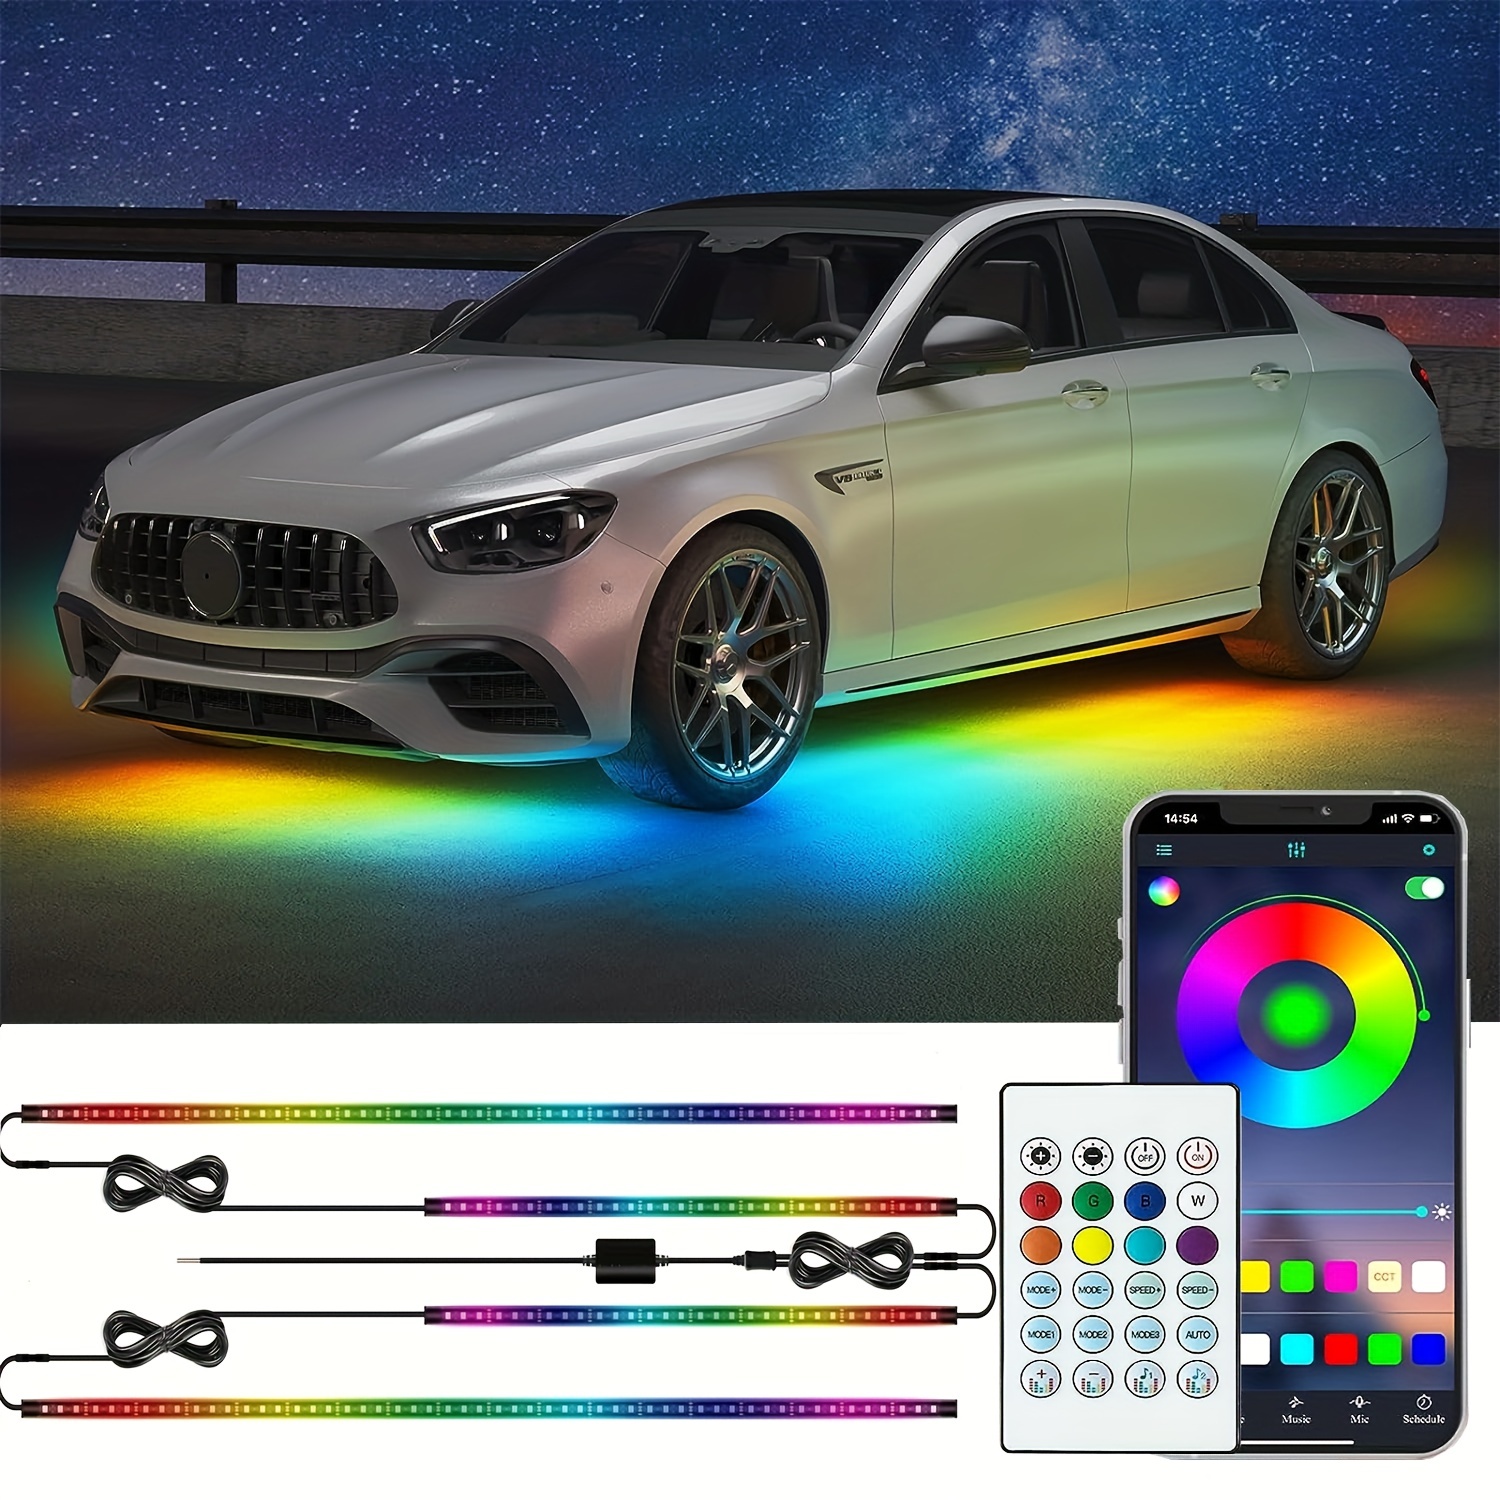 Remote controlled Deluxe LED light kit